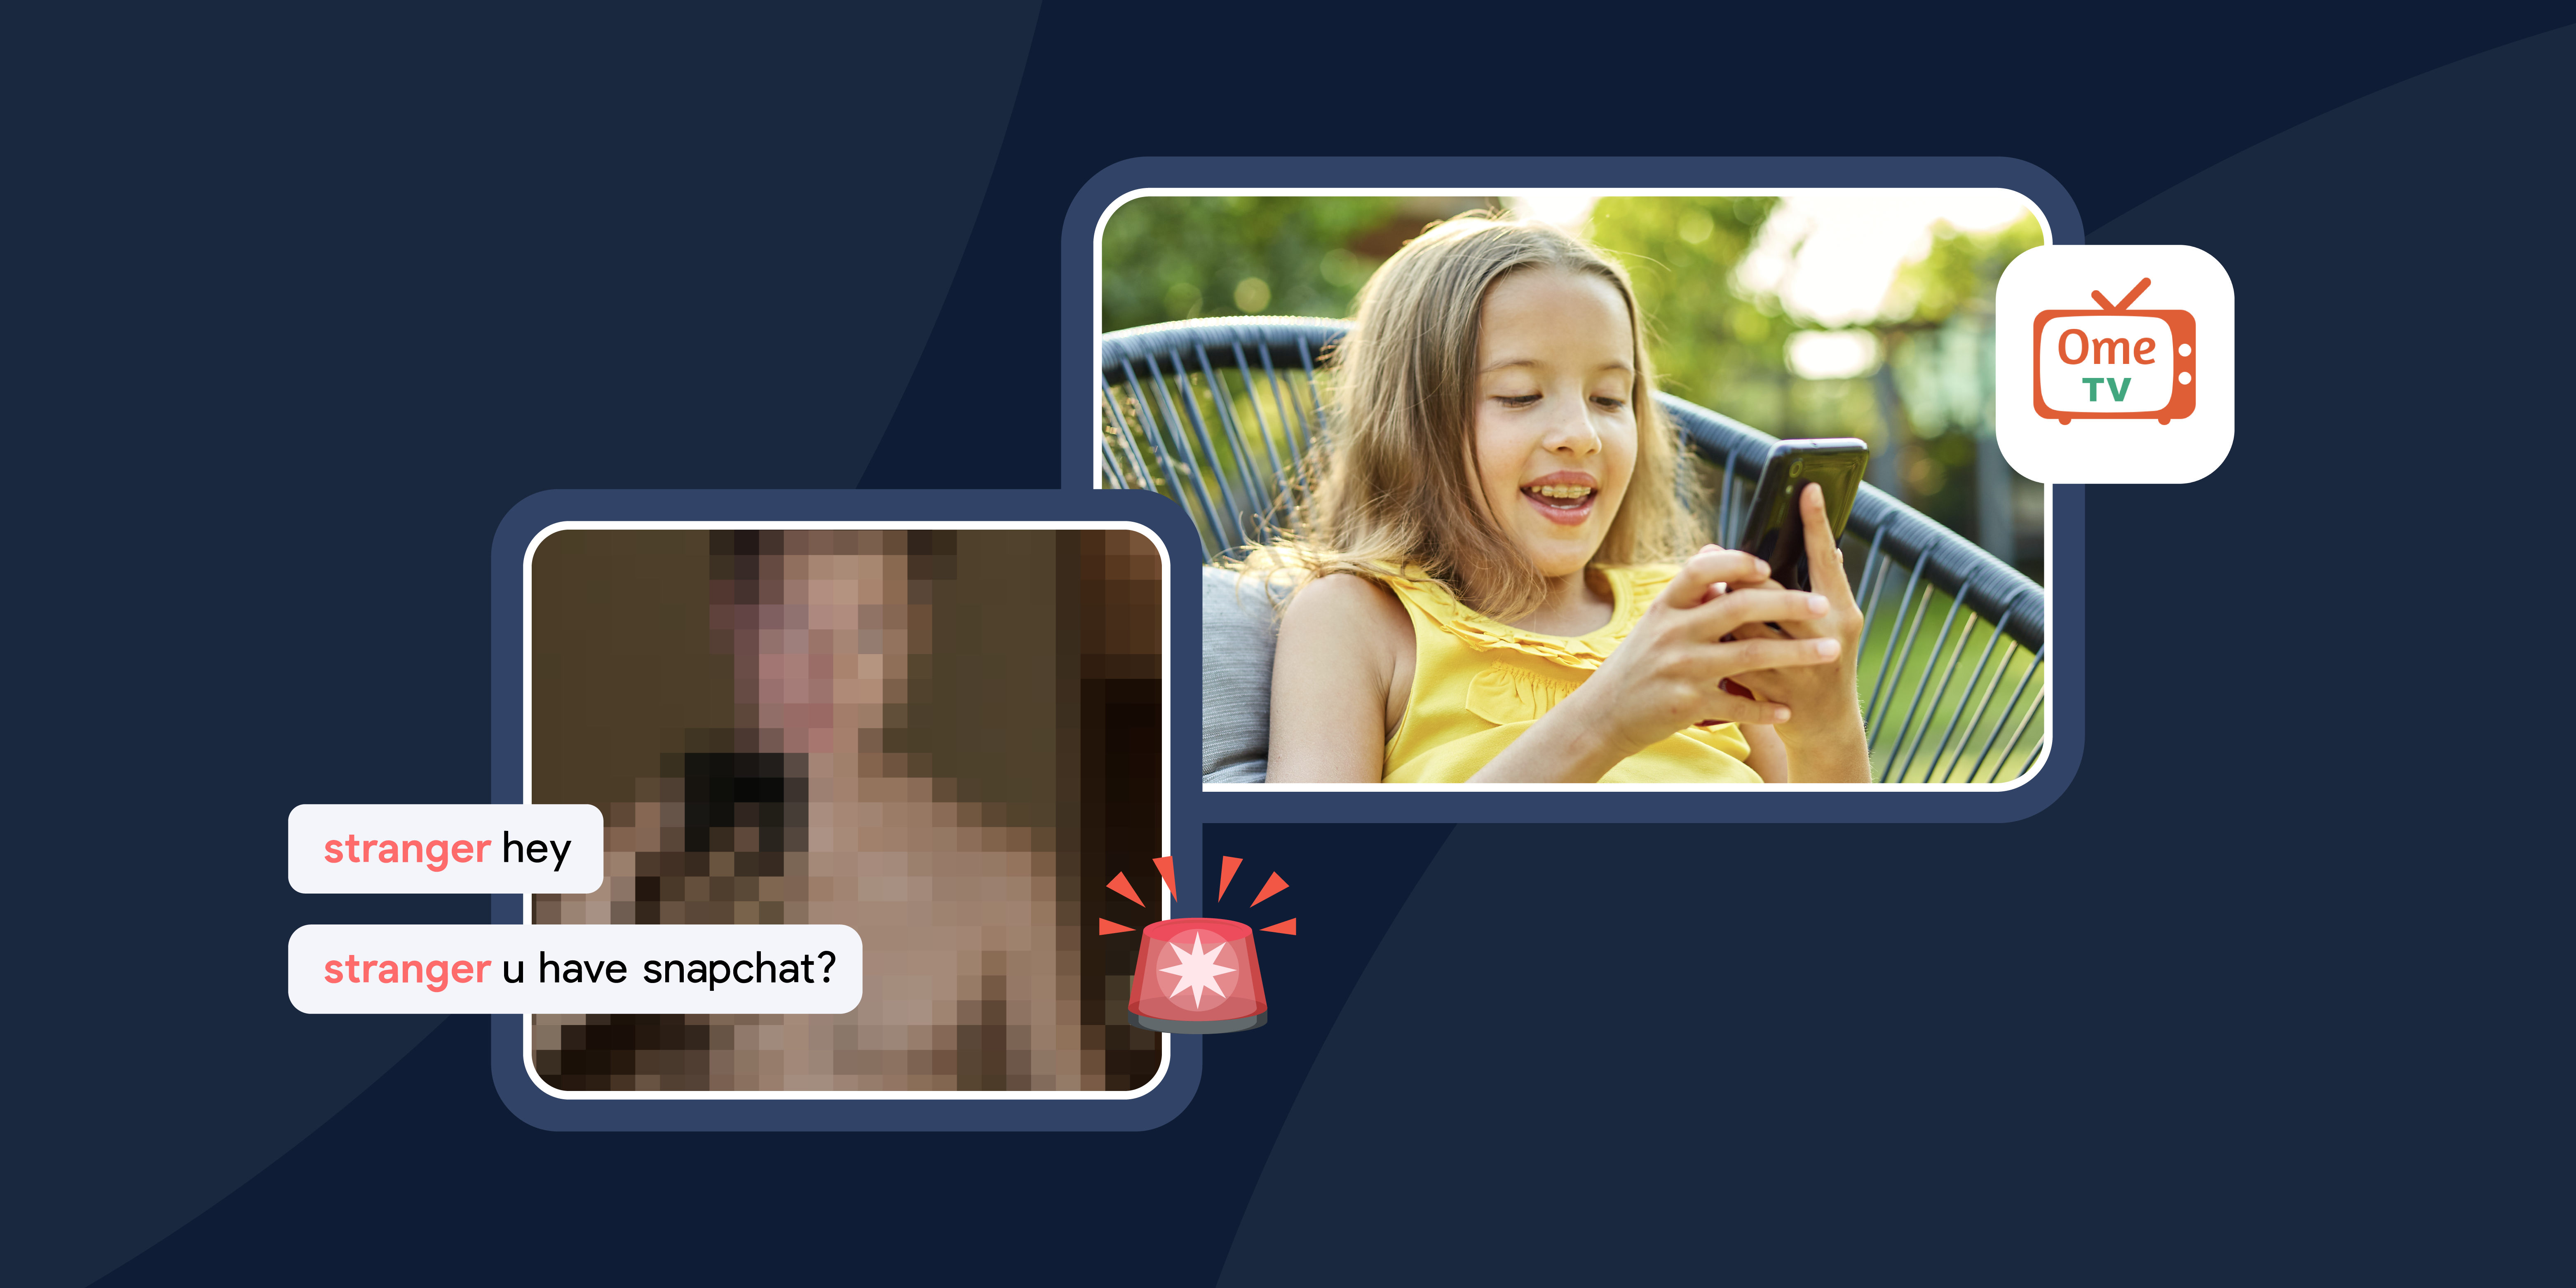 A bare chested boy video chats a young smiling girl on OmeTV, asking if she has snapchat. 